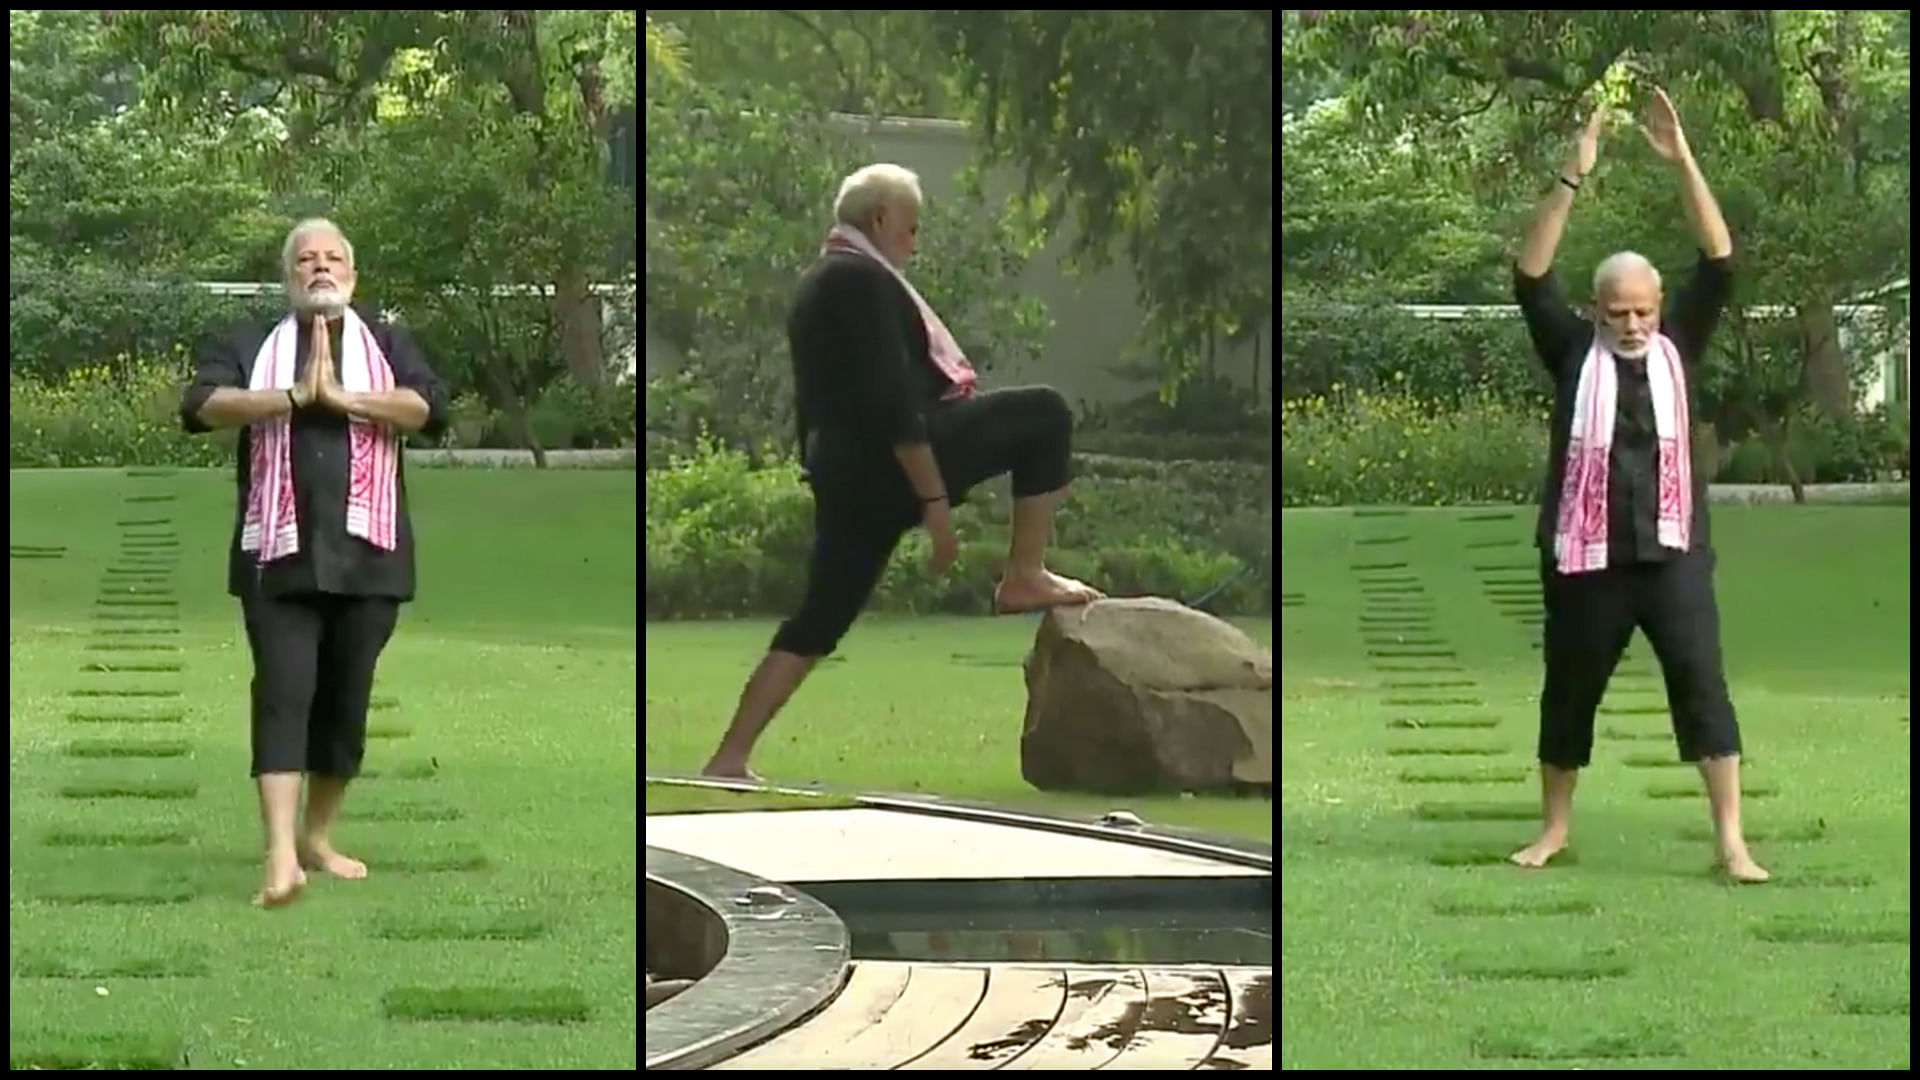 Wondering how PM Modi stays fit? He uses the five natural elements in his morning routine. Check it out here.